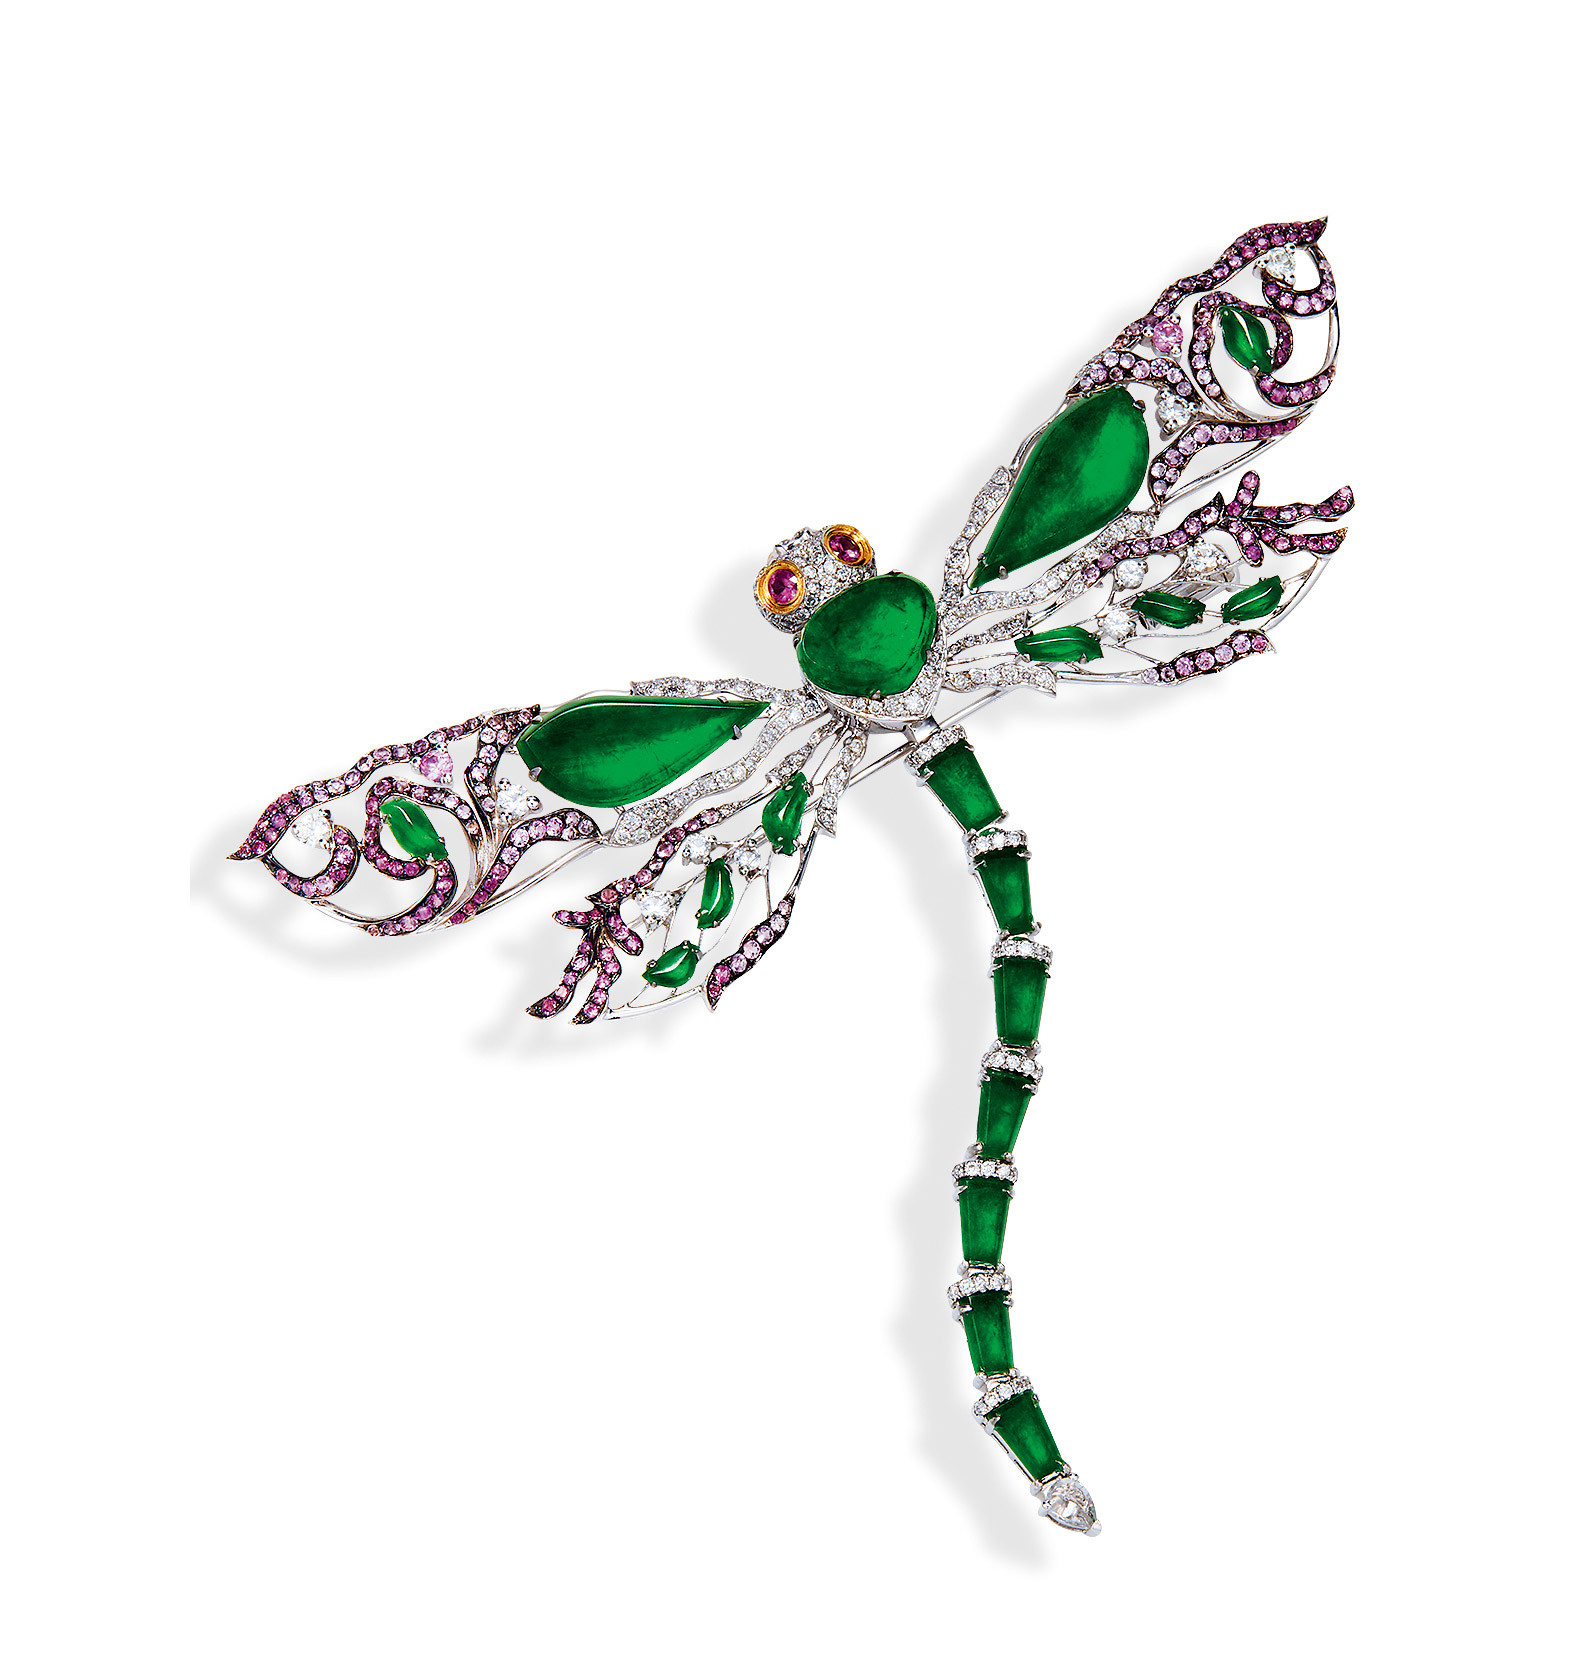 A JADEITE, DIAMOND AND COLORED STONE ’DRAGONFLY’ BROOCH